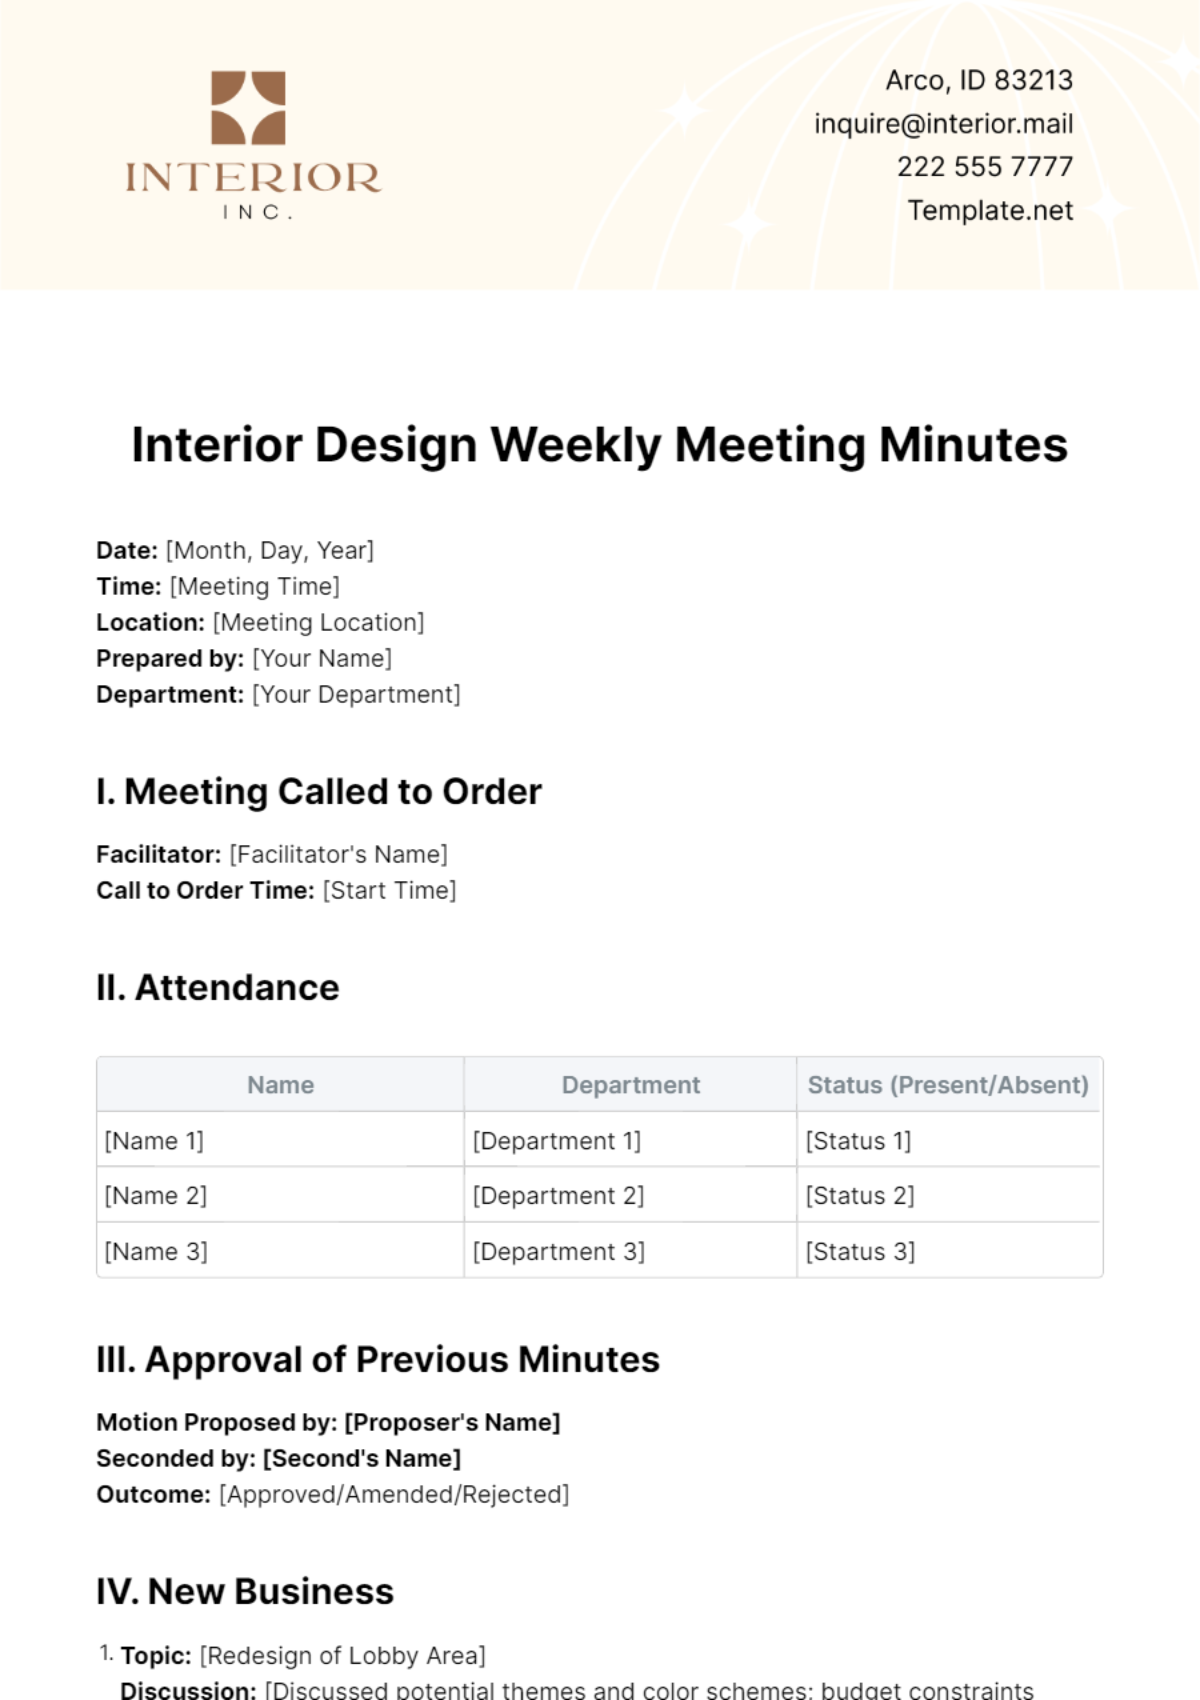 Interior Design Weekly Meeting Minutes Template